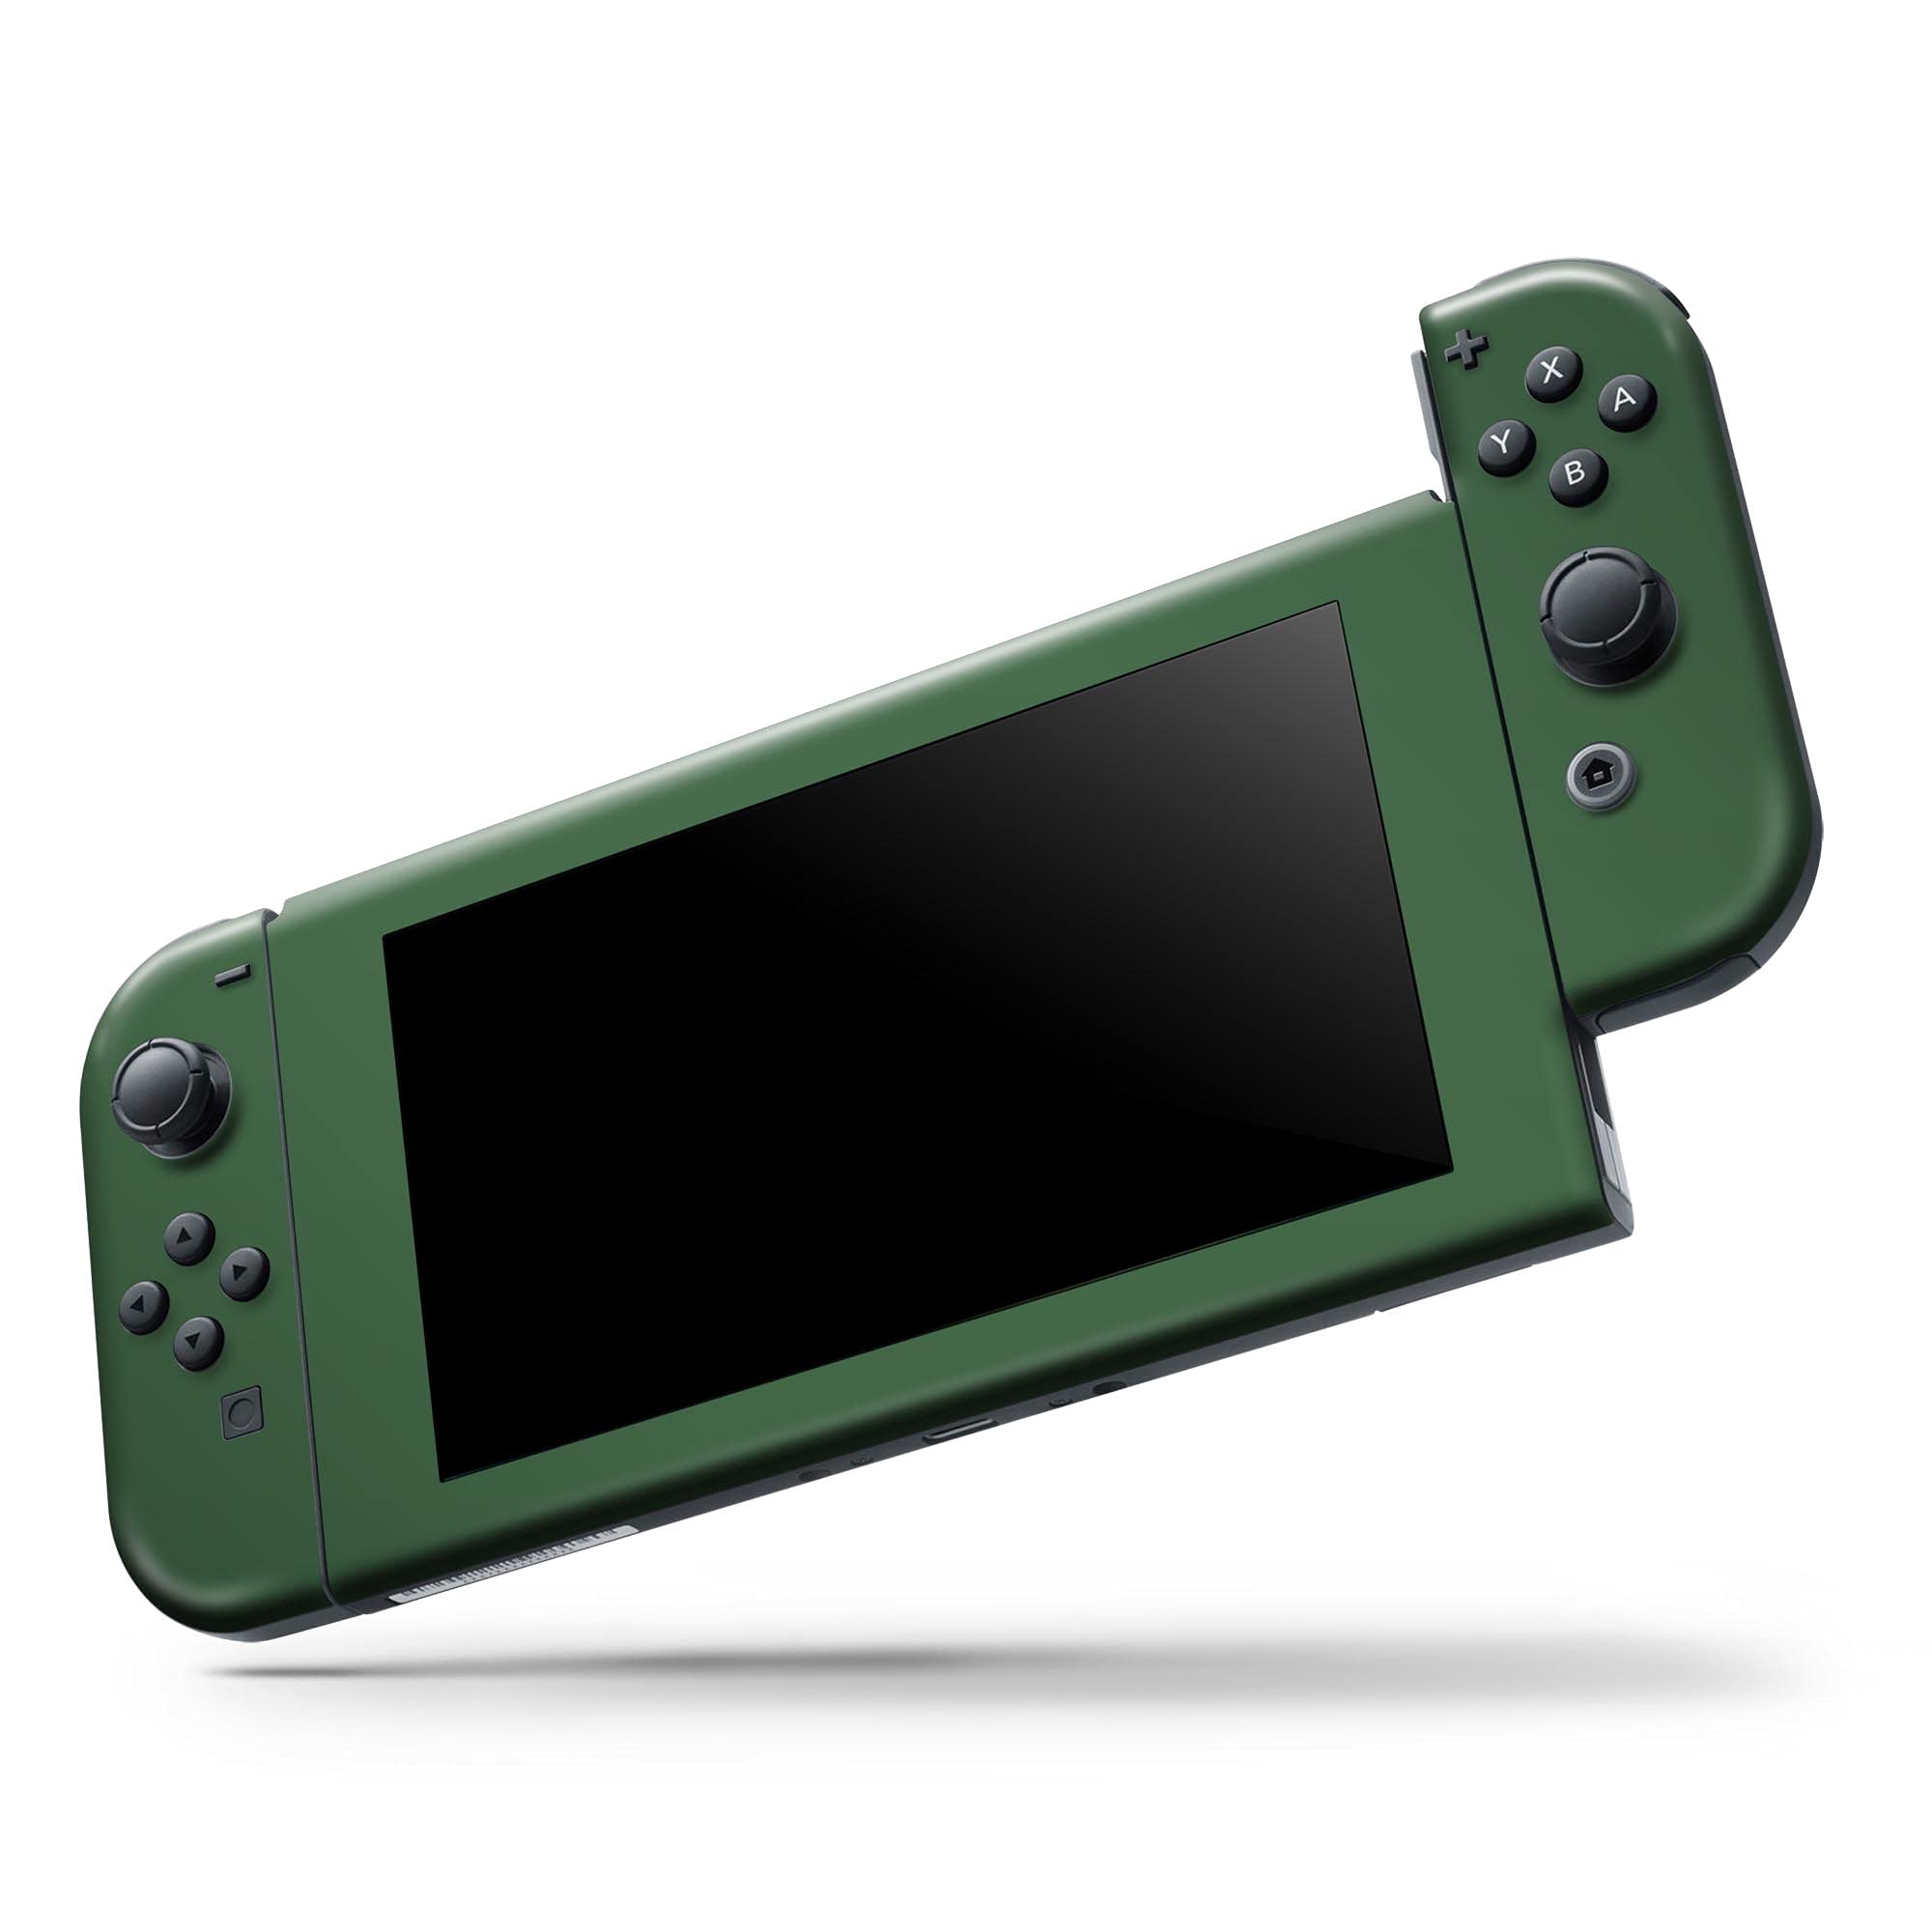 Design Skinz - Compatible with Nintendo Switch OLED Console + Joy-Con - Skin Decal Protective Scratch-Resistant Removable Vinyl Wrap Cover - Solid Hunter Green